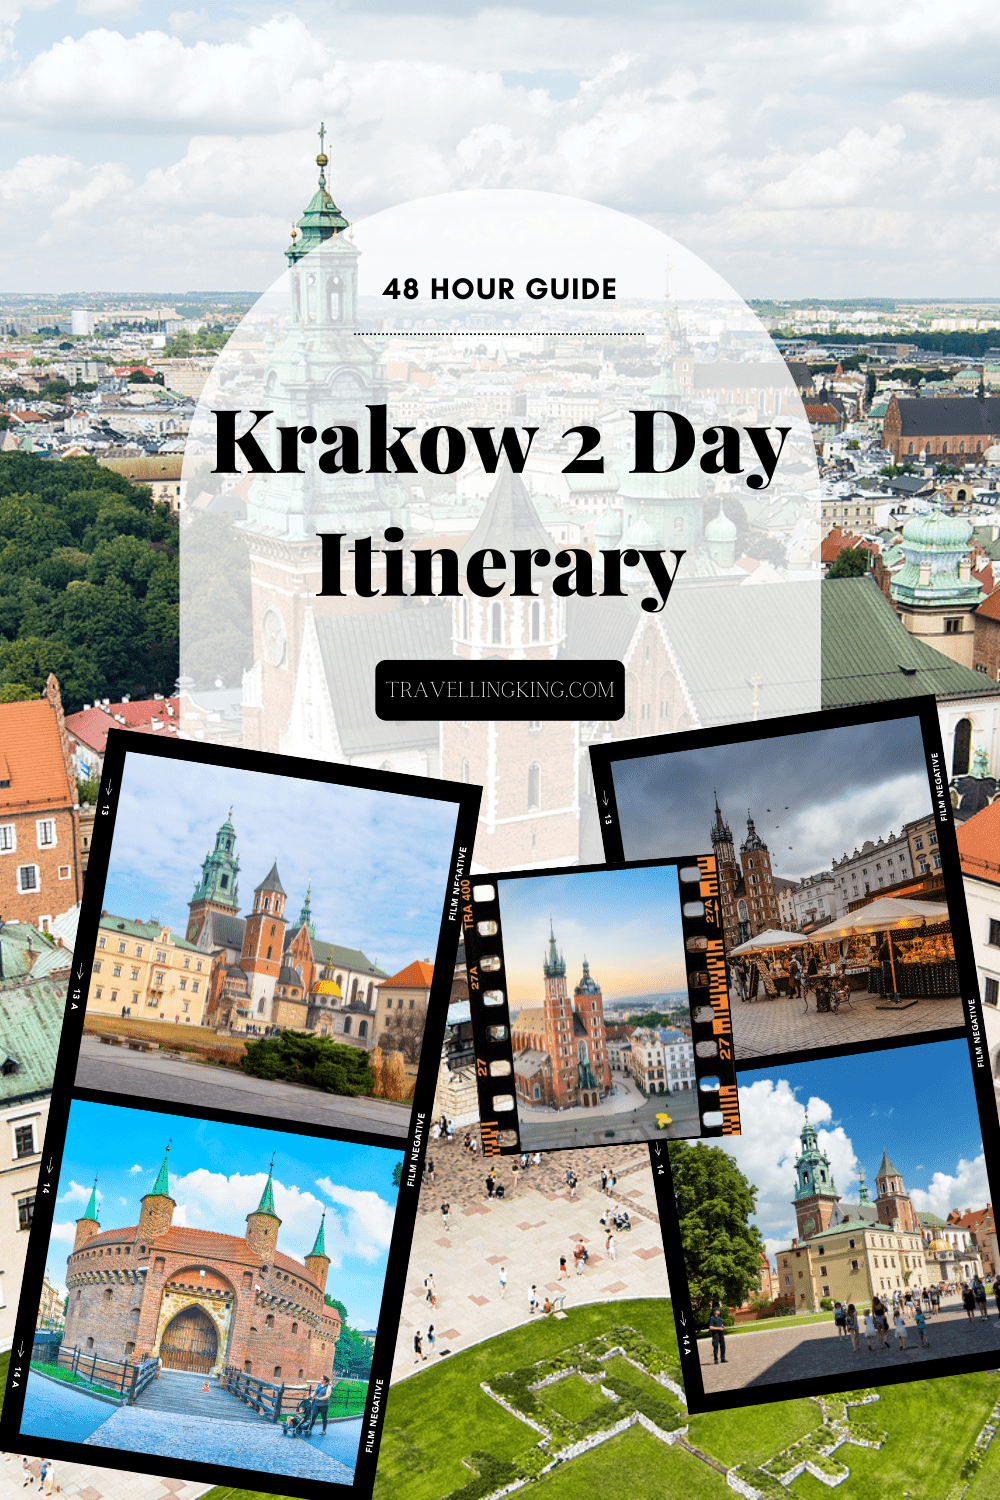 48 Hours in Krakow - 2 Day Itinerary